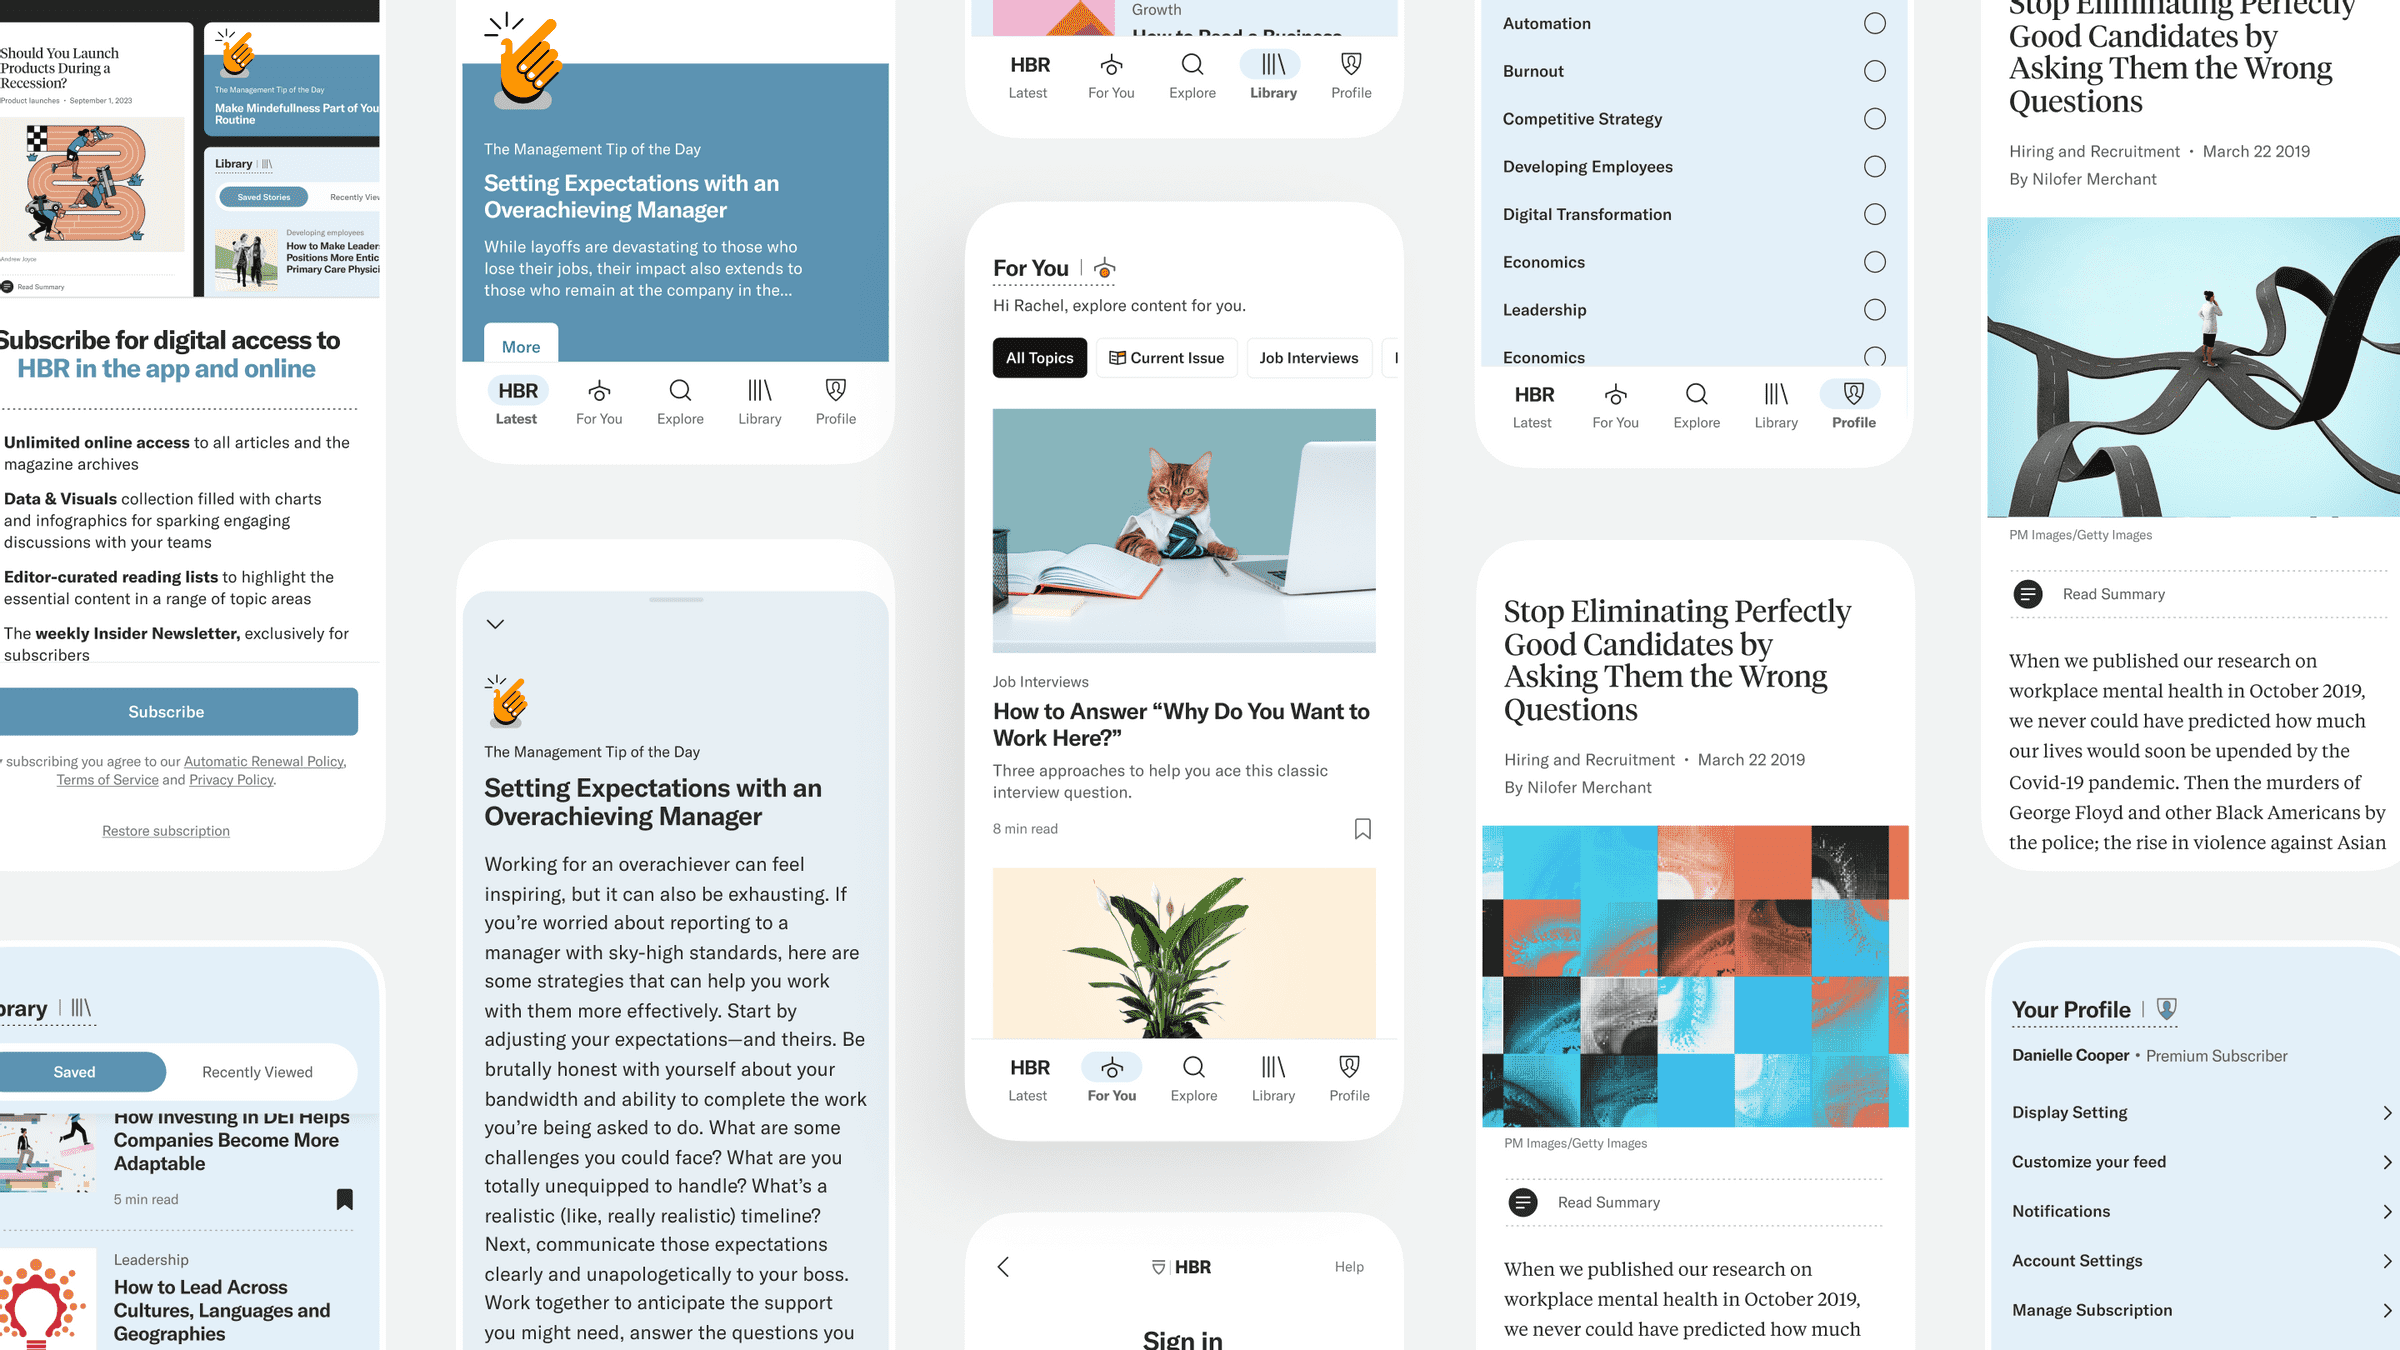 Screenshots of the new HBR mobile app arranged in a grid